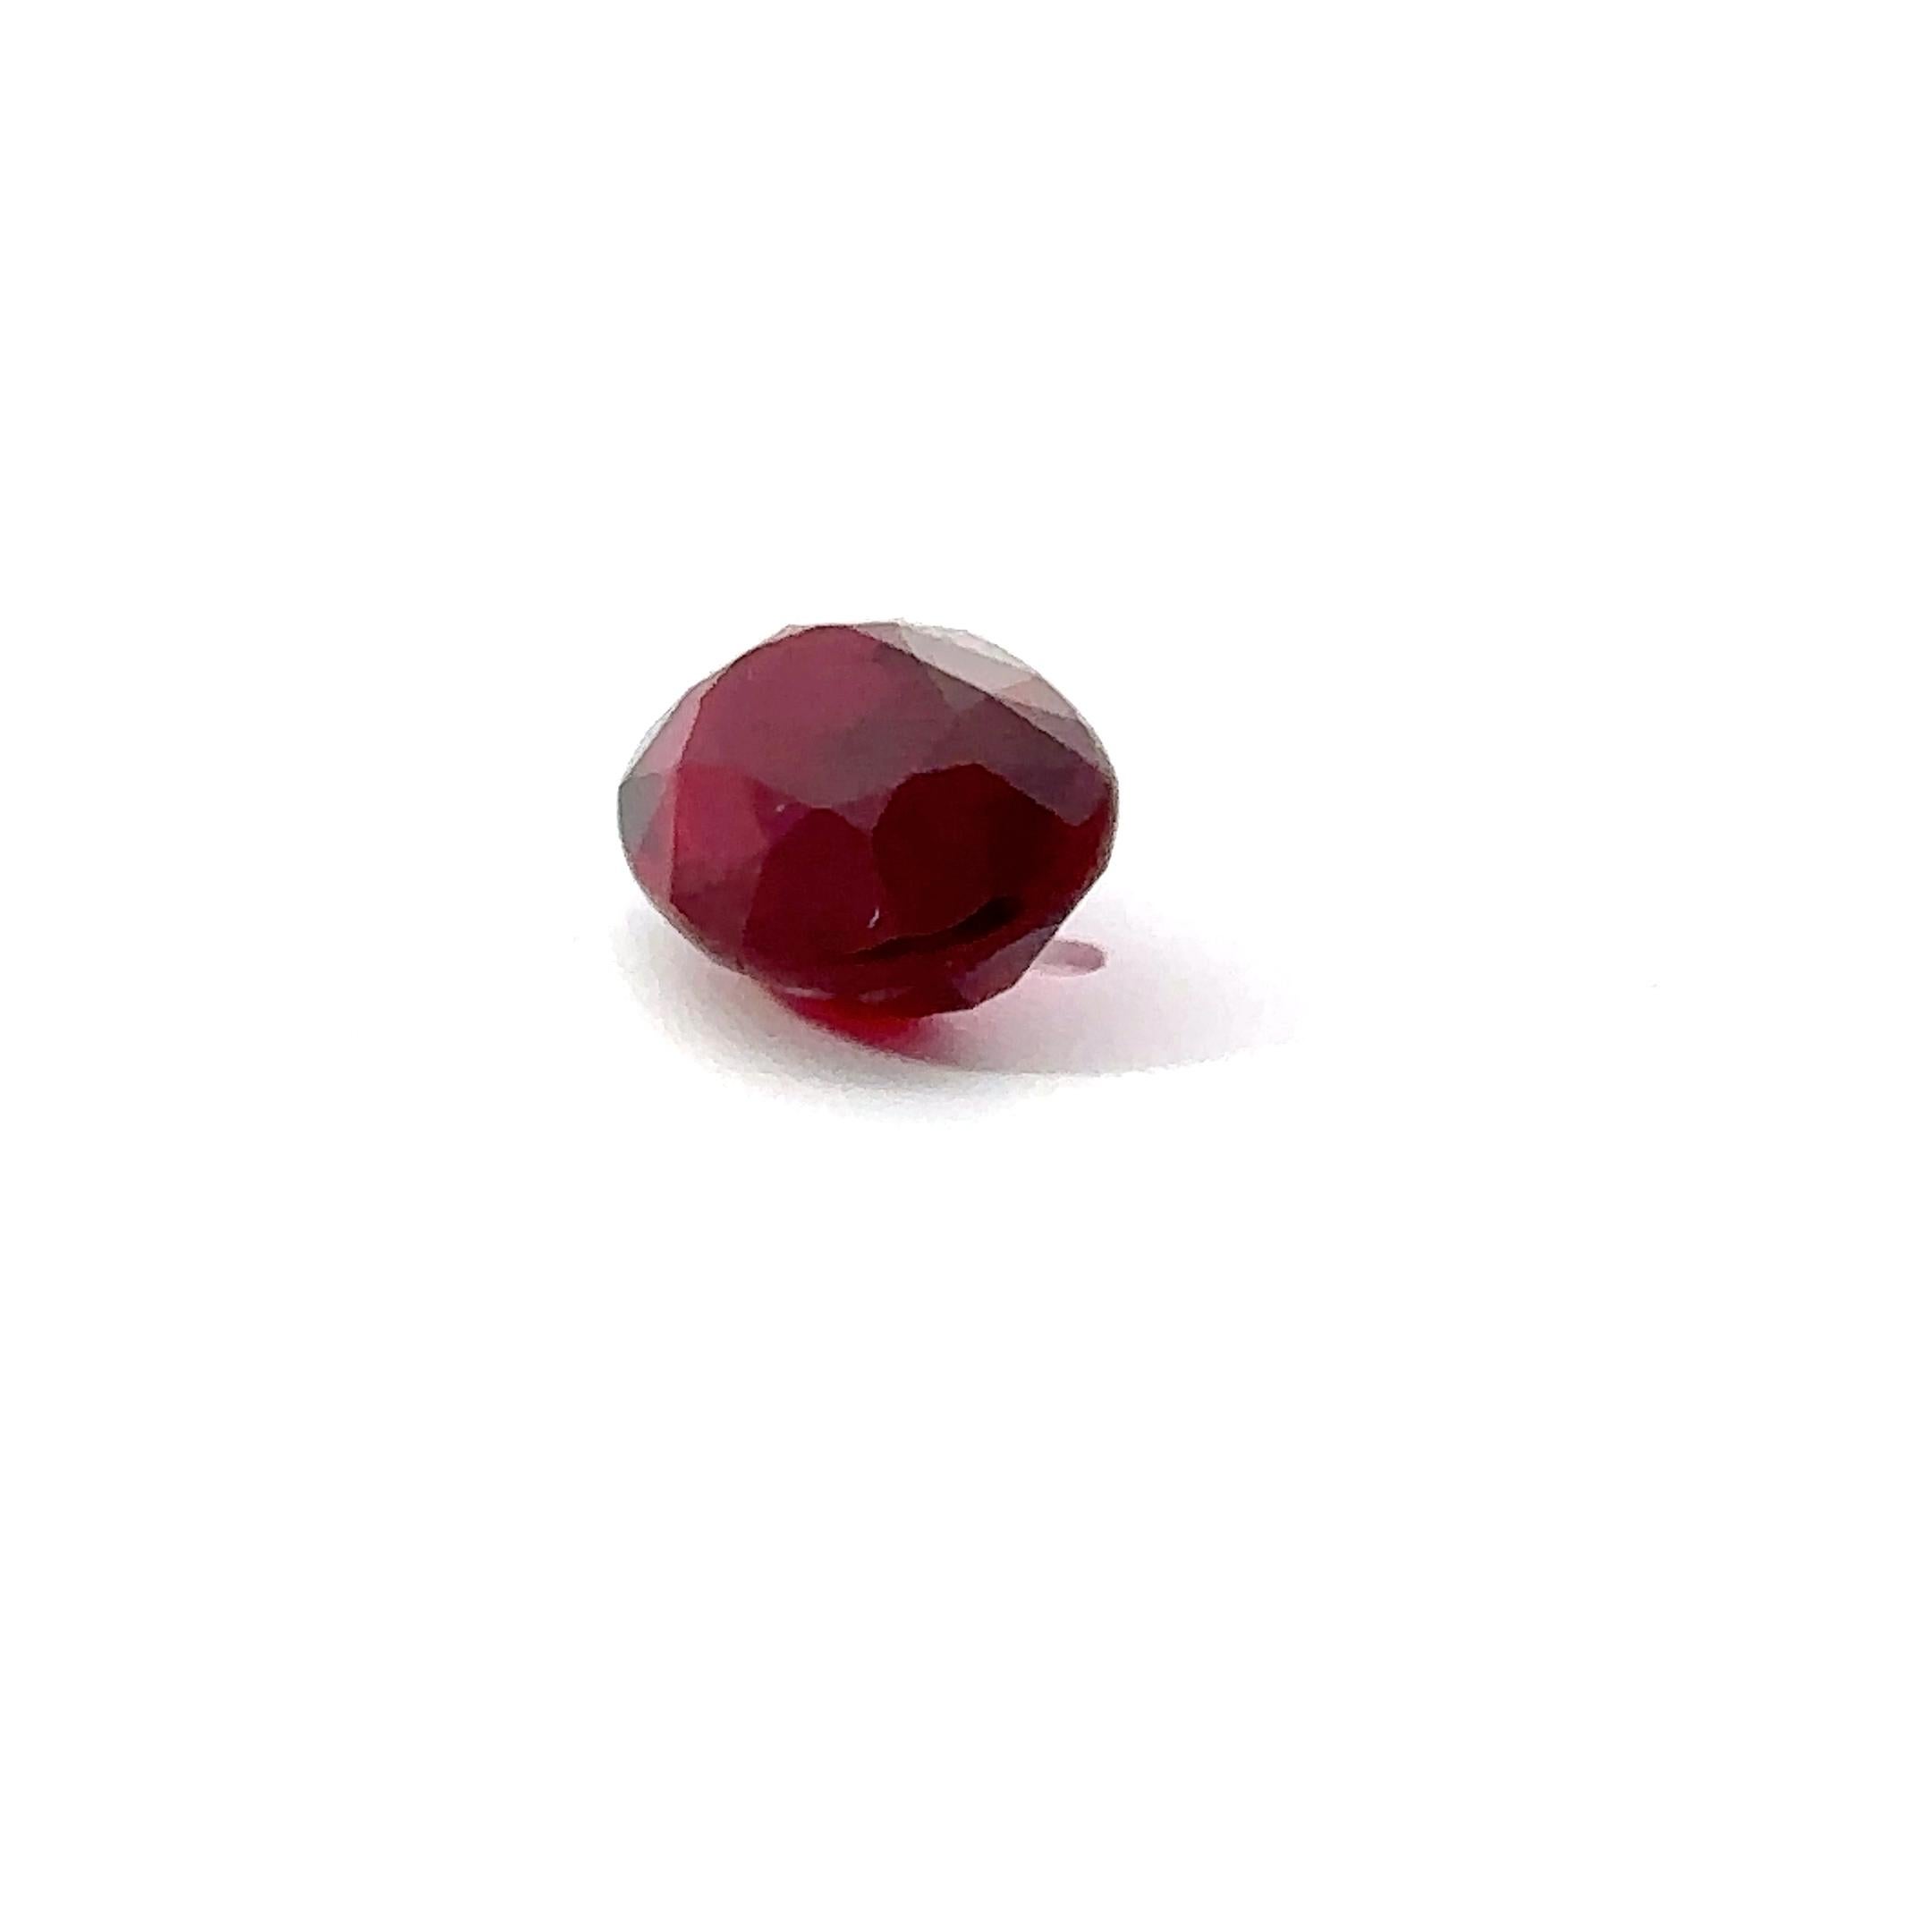 Natural Ruby
No Heated
Deep Red
Oval Shape
Origin From Mozambique